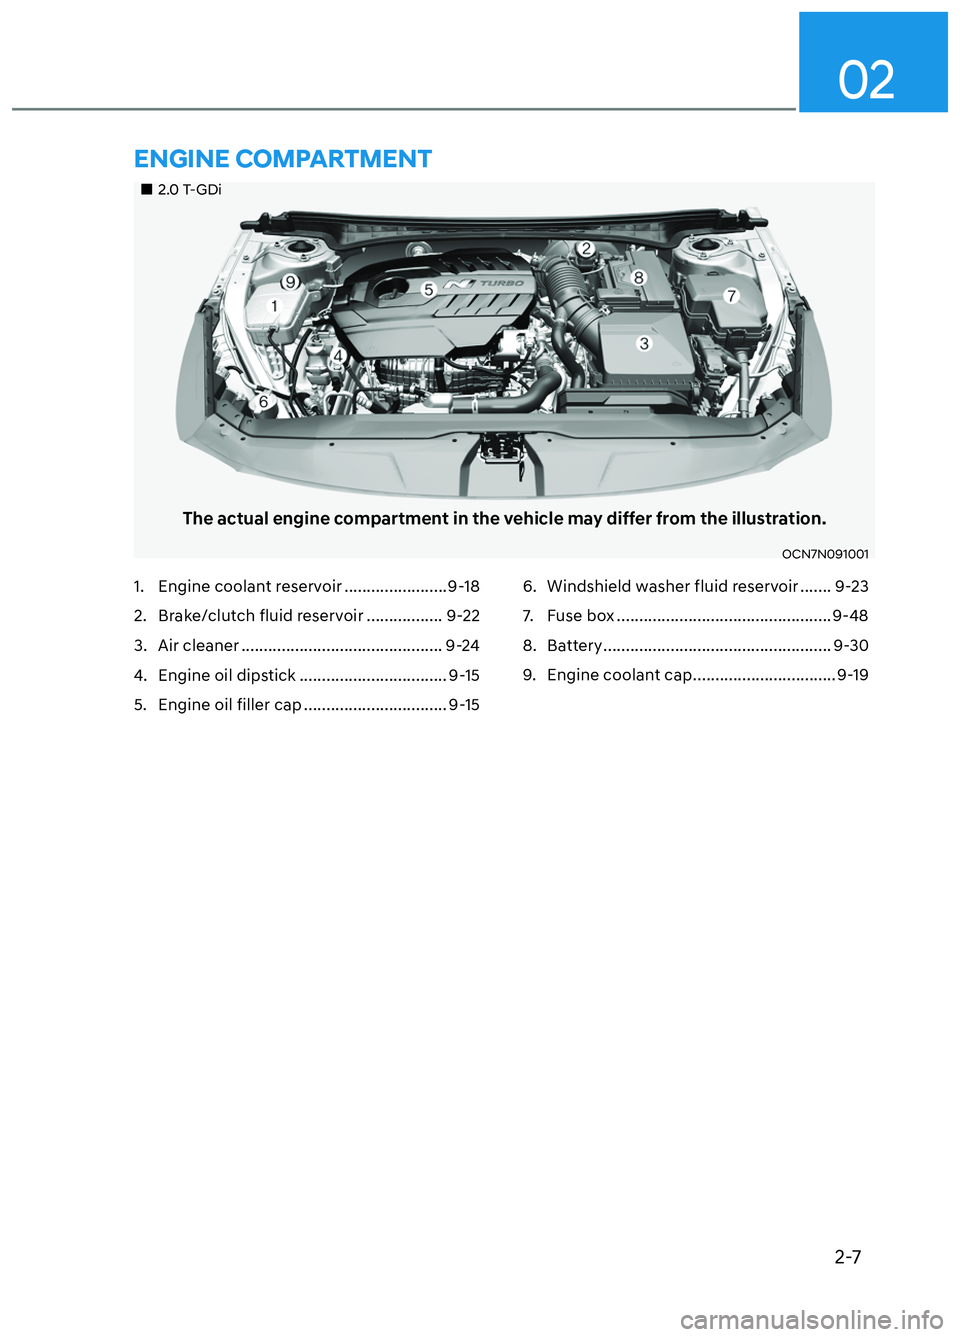 HYUNDAI ELANTRA N 2022  Owners Manual 2-7
02
2.0 T-GDi2.0 T-GDi
The actual engine compartment in the vehicle may differ from the illustration.
OCN7N091001 OCN7N091001 
1.  Engine coolant reservoir .......................9-18
2